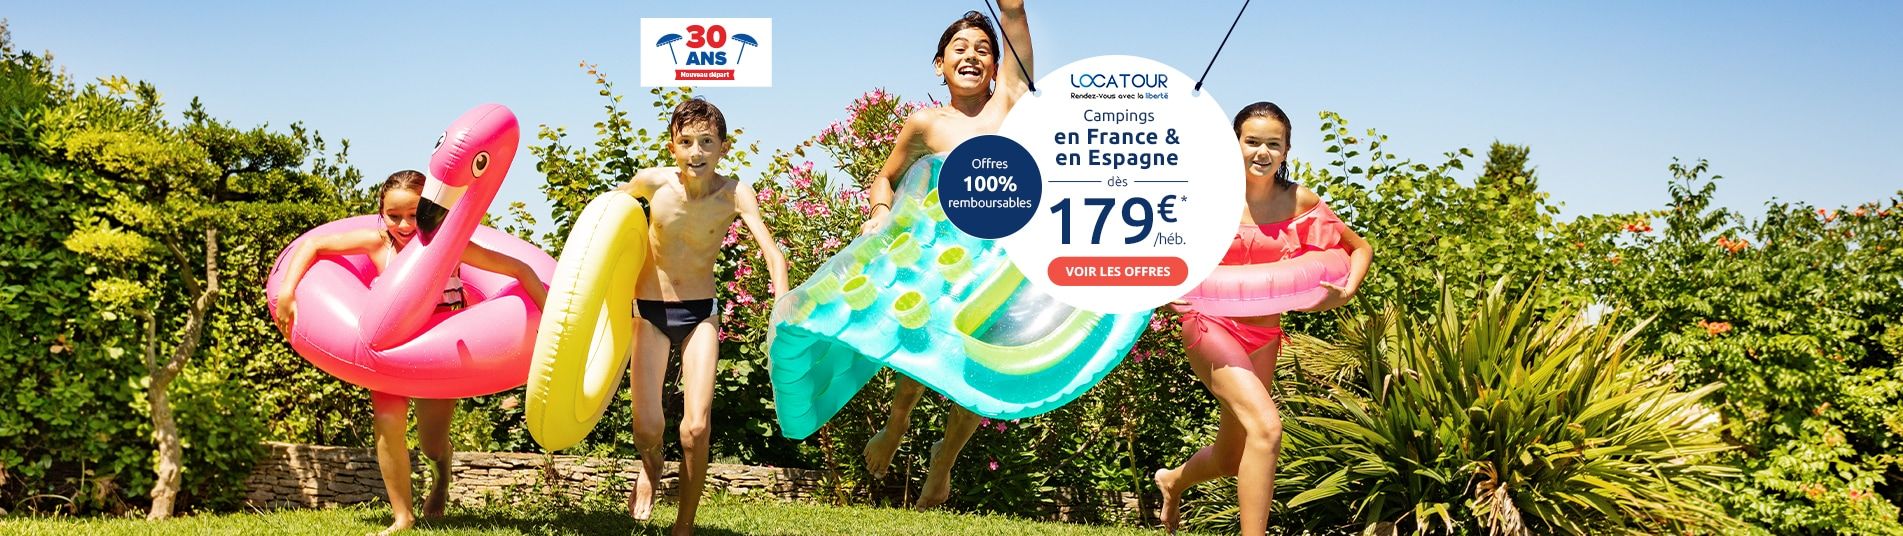 carrefour voyages groupes